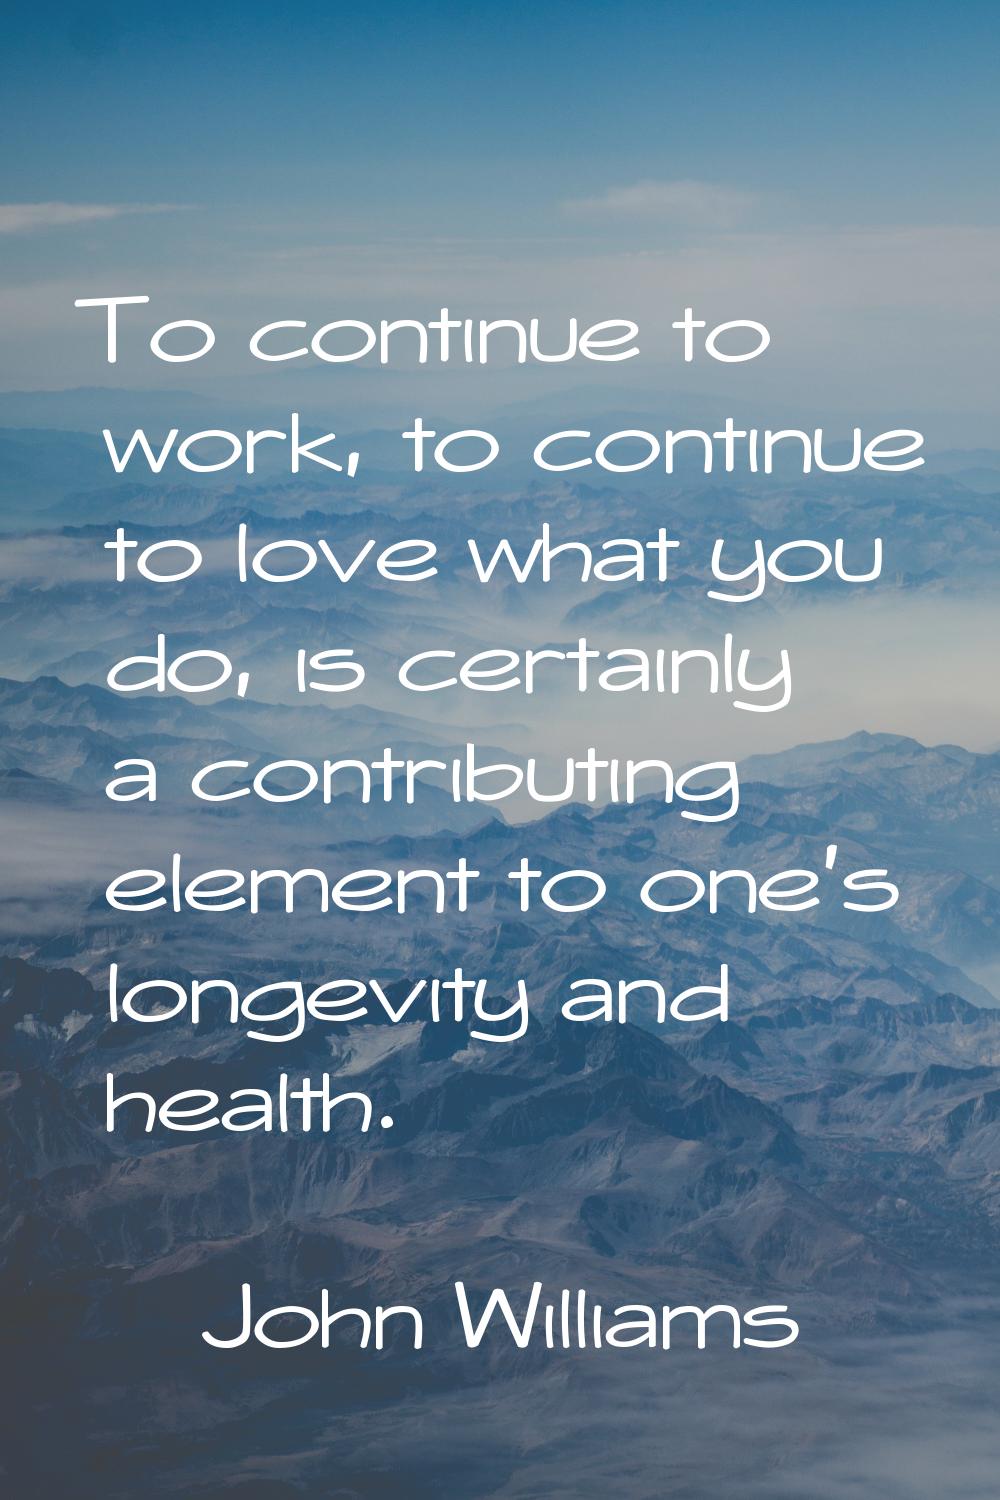 To continue to work, to continue to love what you do, is certainly a contributing element to one's 